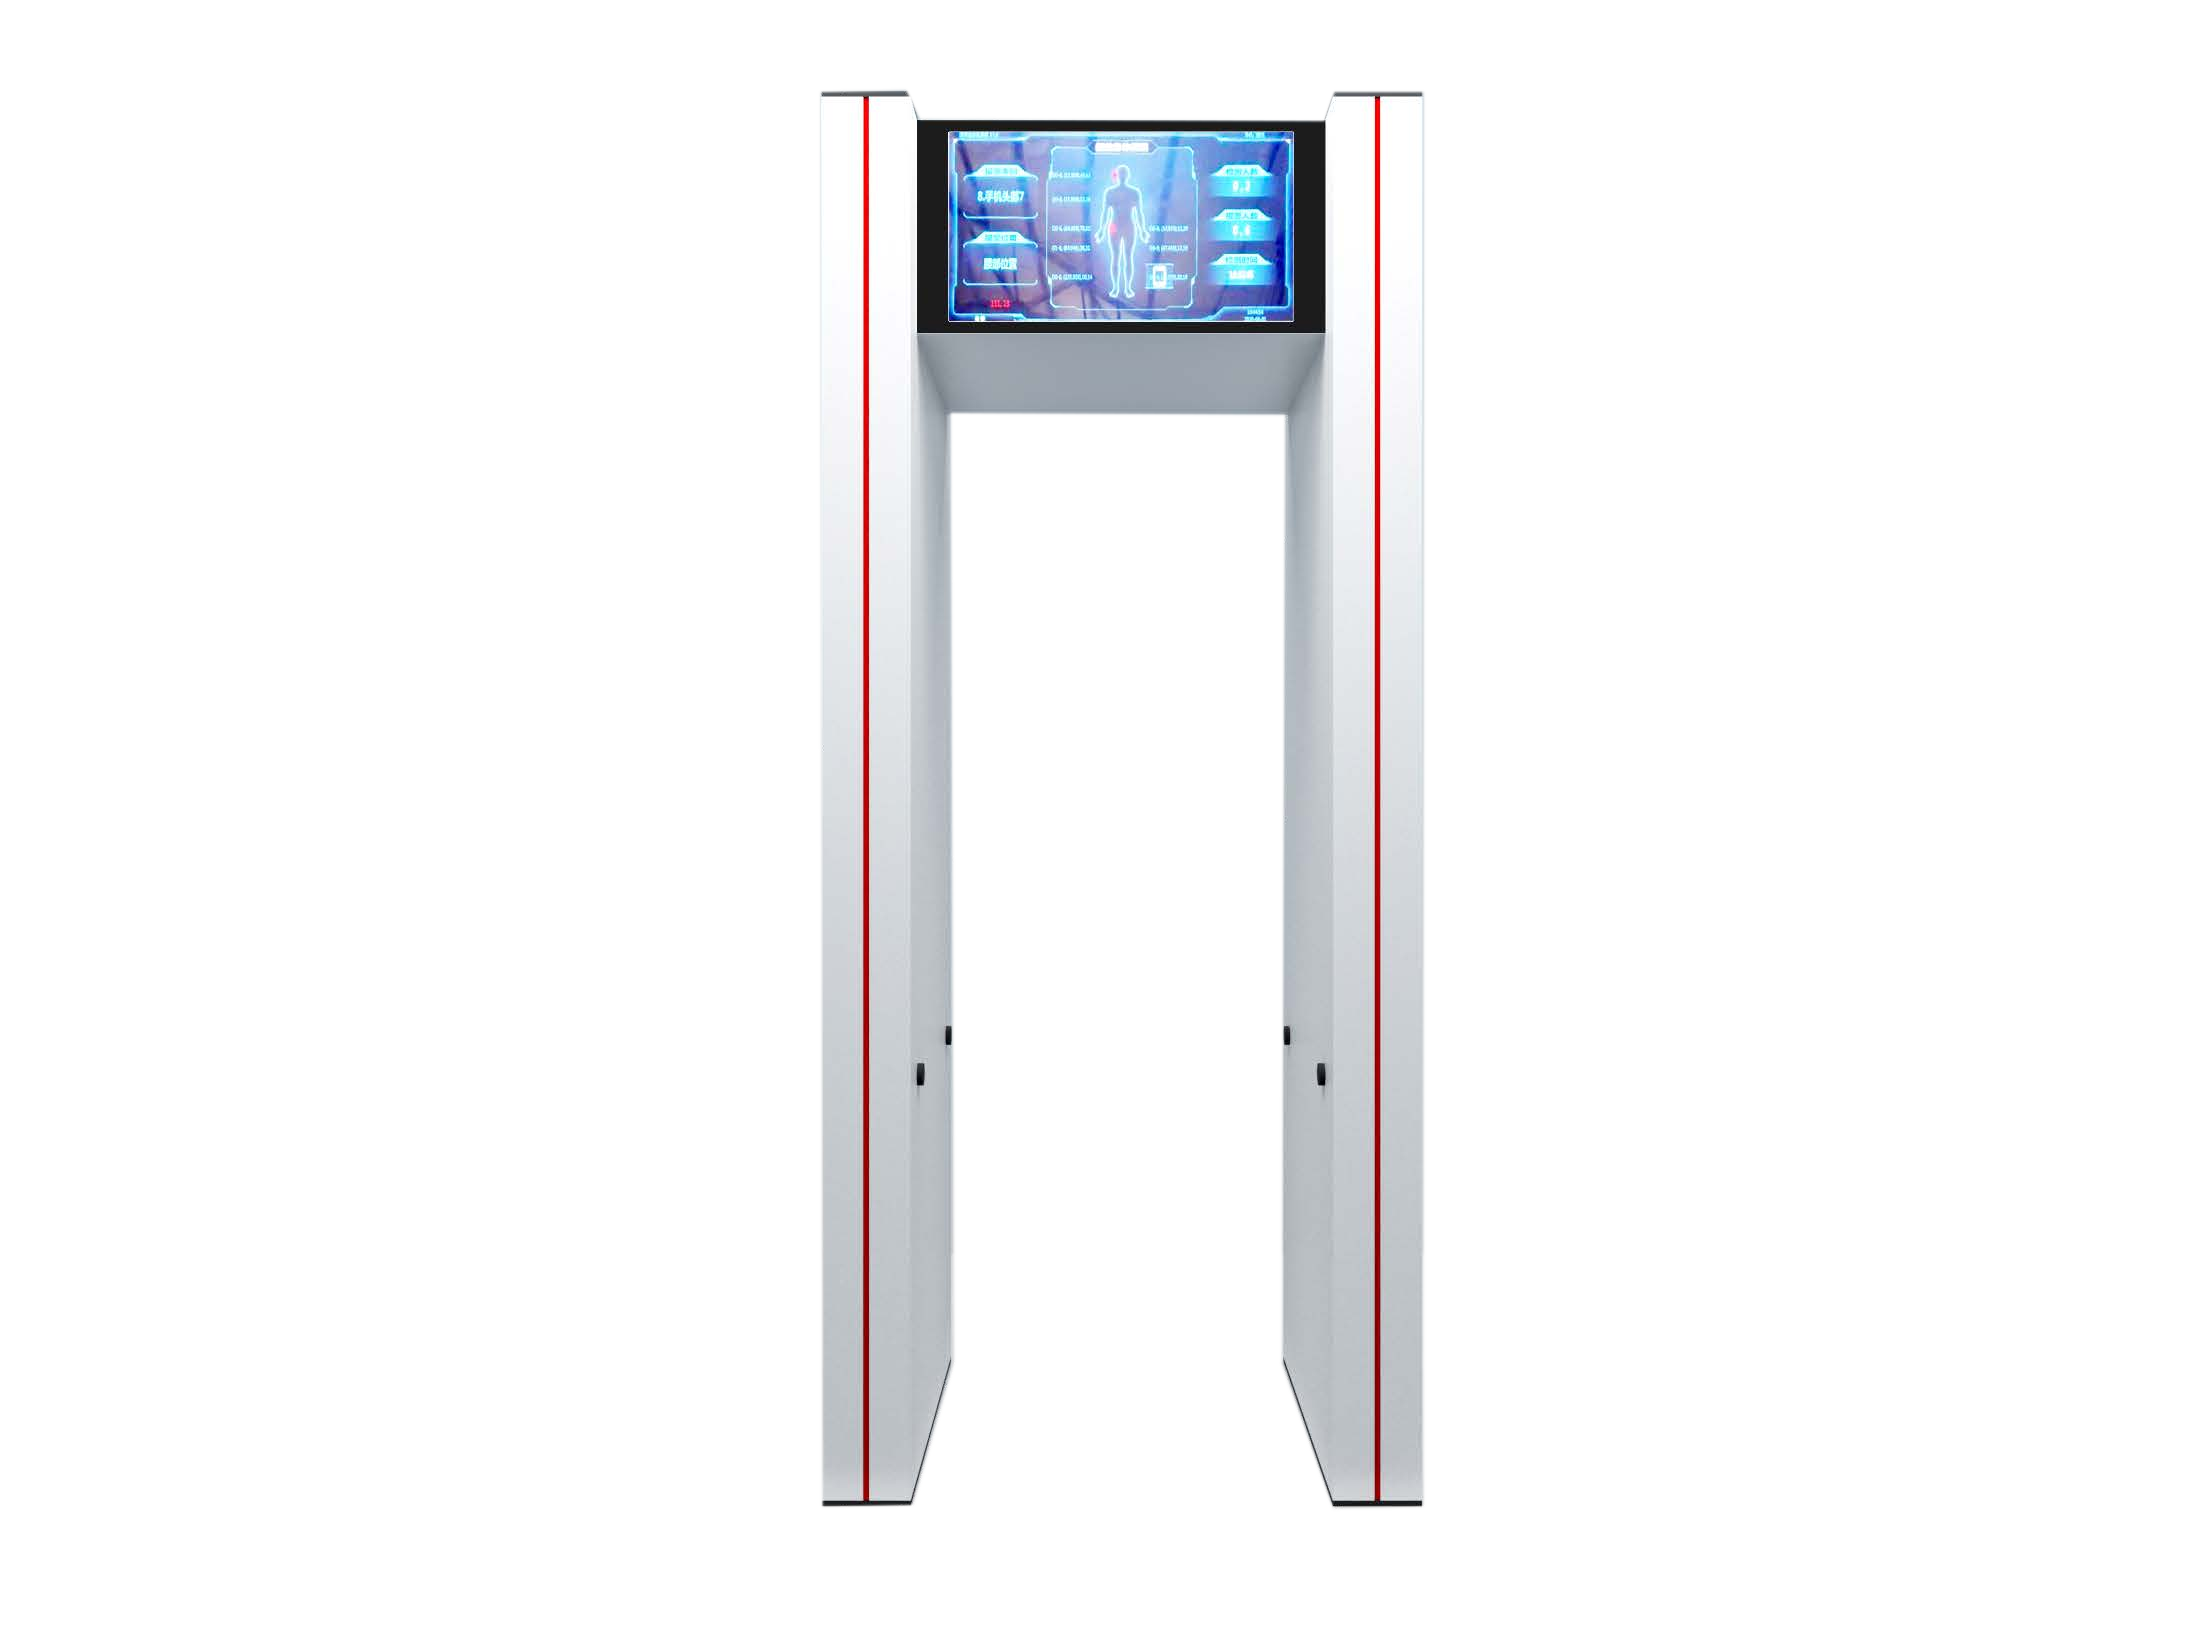 EI-MD3000 Intelligent security gate for contraband